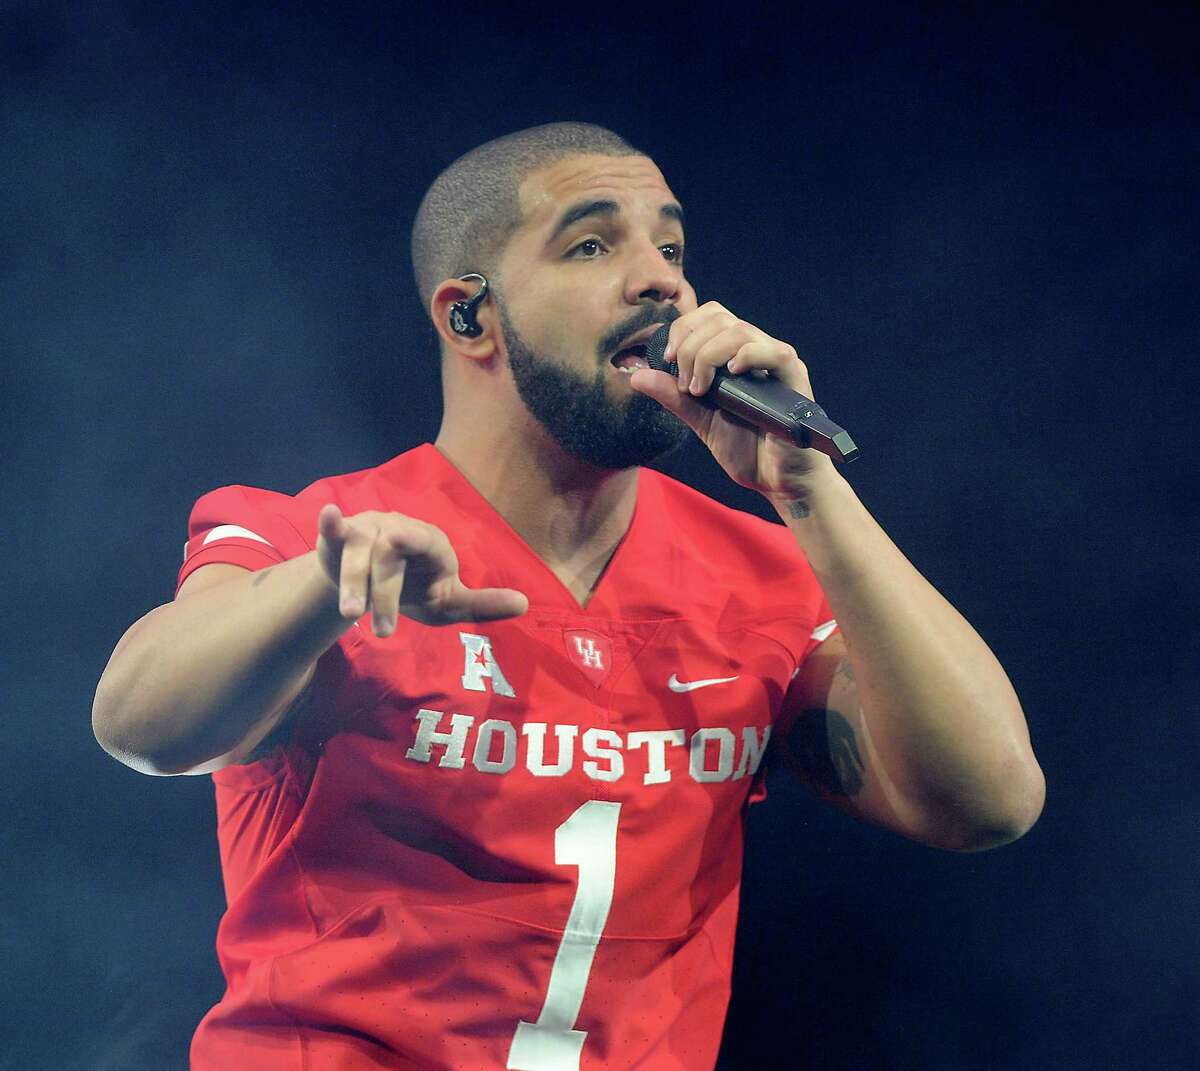 Drake performed in a University of Houston football jersey at a show in Houston.